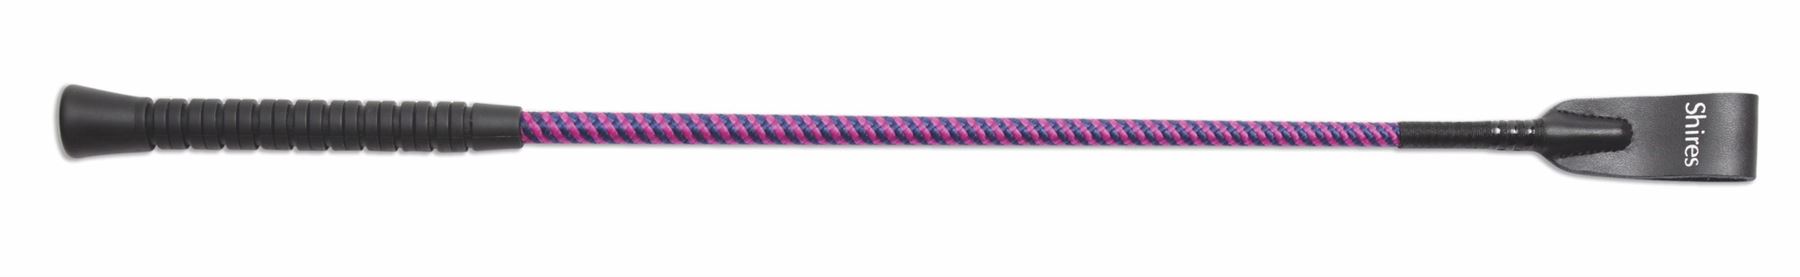 Shires Rubber Grip Whip - Just Horse Riders